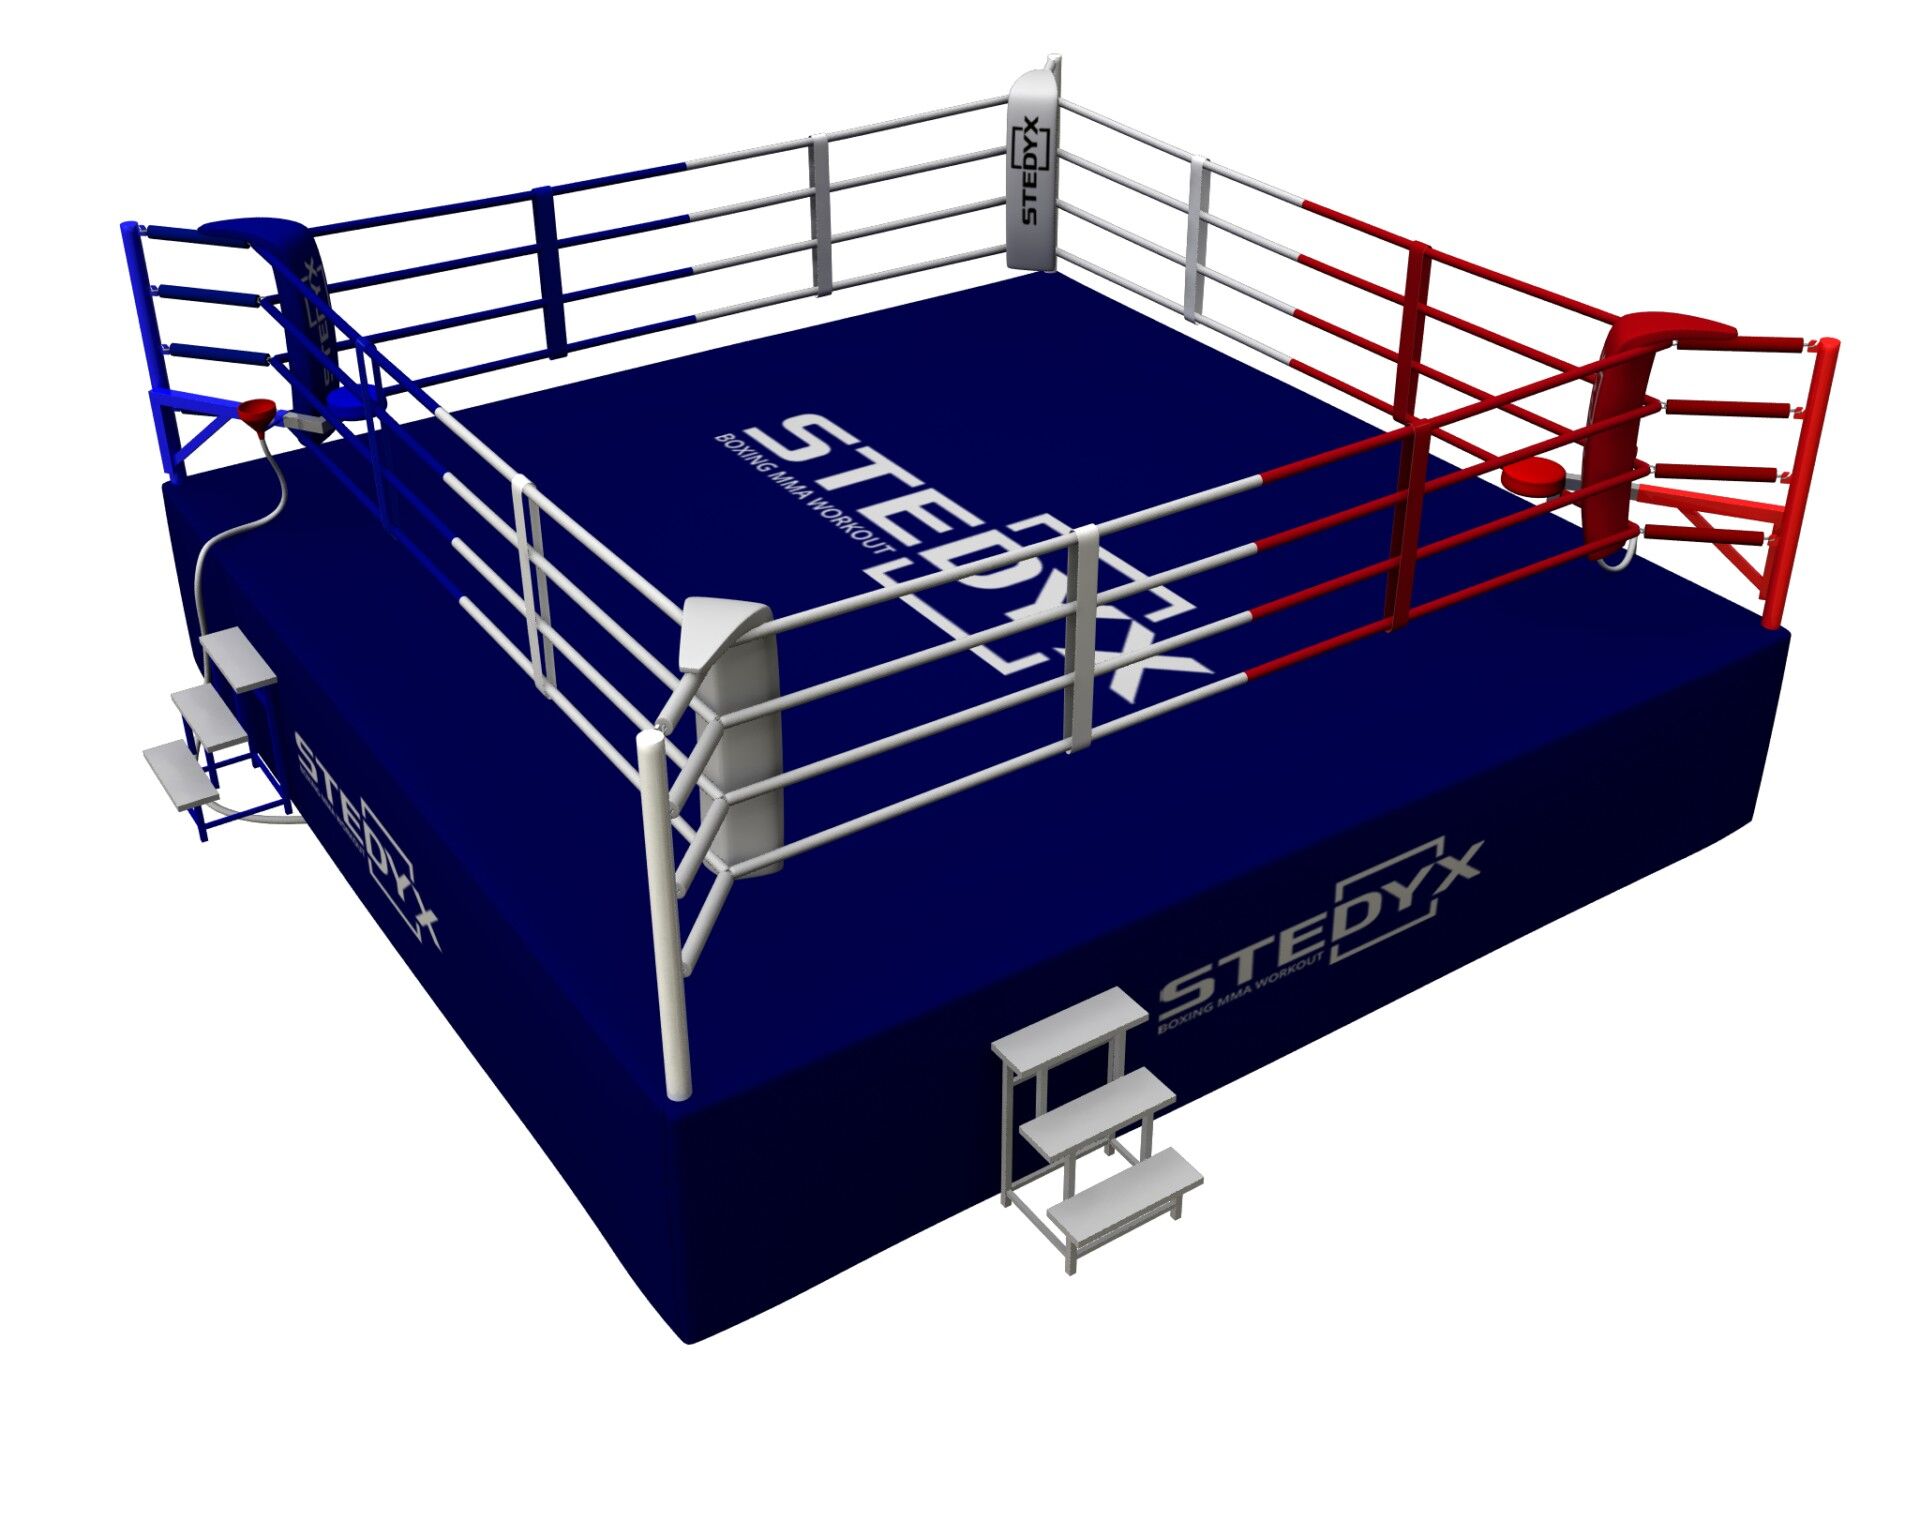 16' X 16' Custom Boxing Ring (With Your Logo) Complete | PROLAST.com